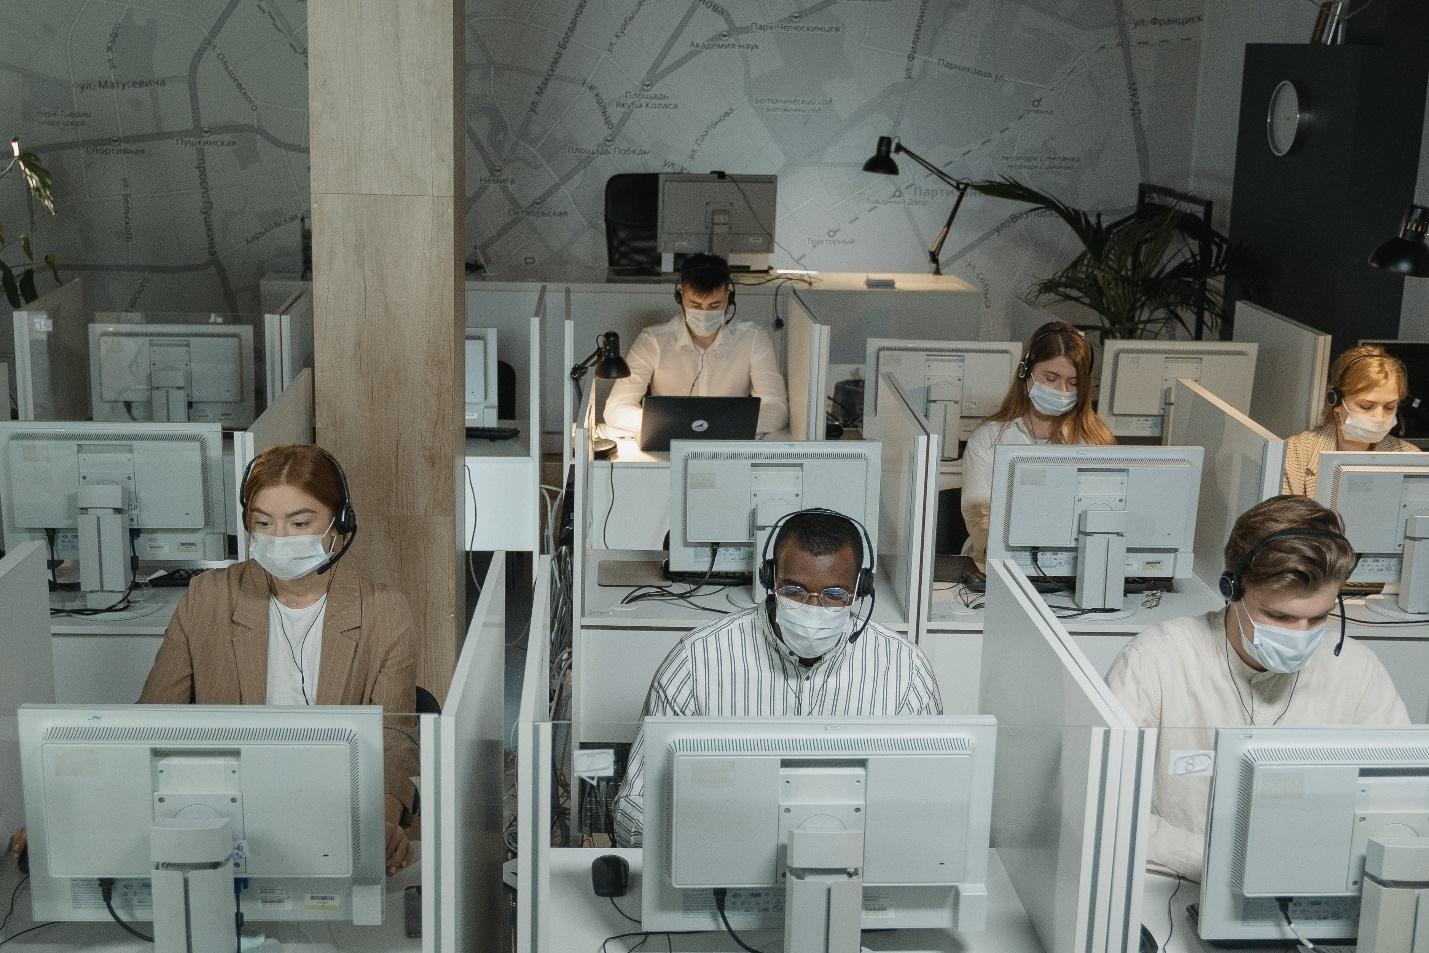 People working in an office during the pandemic